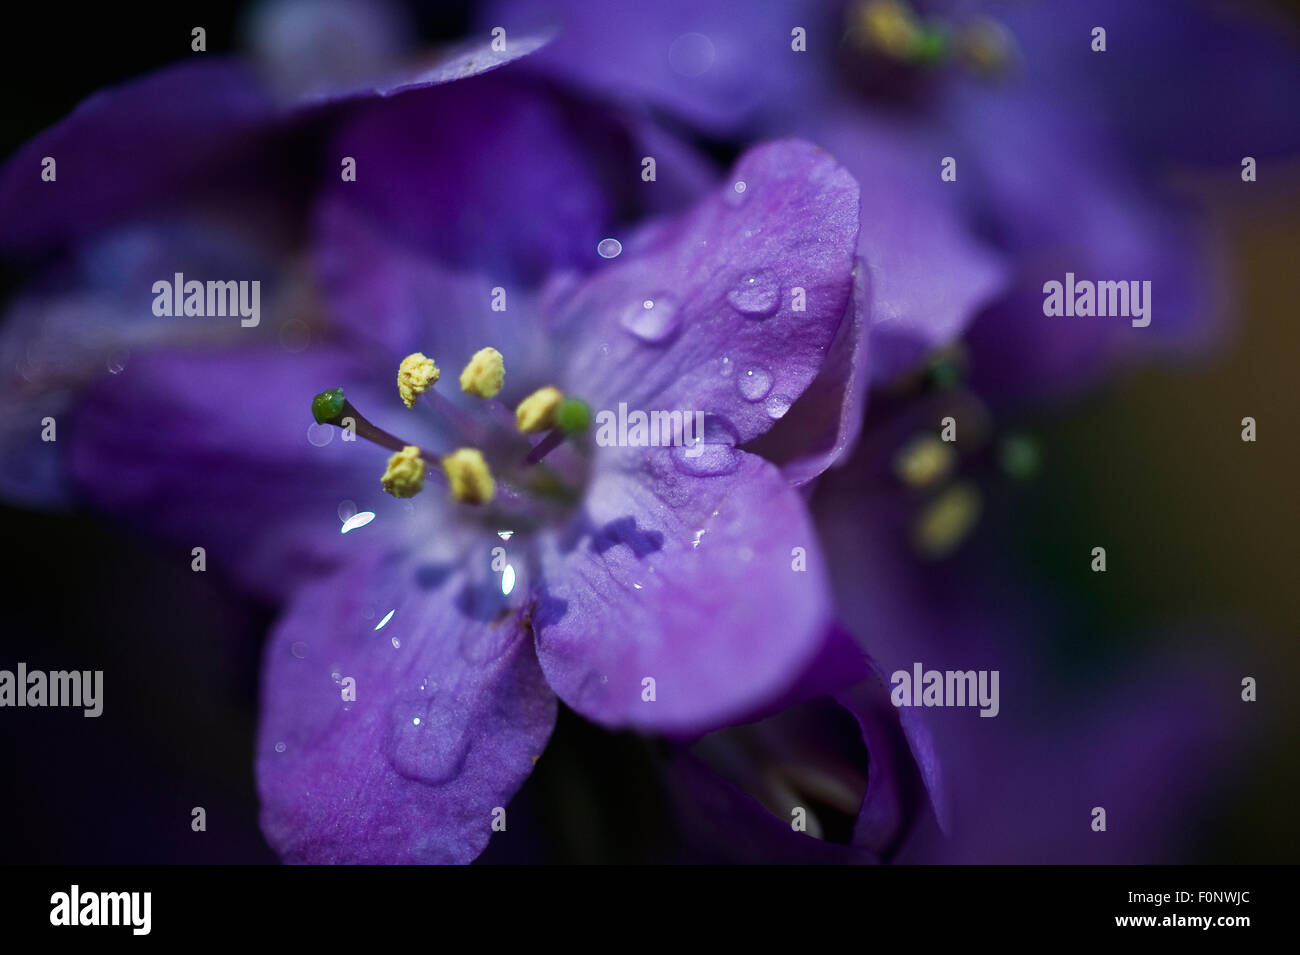 Spiderwort (Tradescantia) flower with water droplets on petals, Madeira, March 2009 Stock Photo